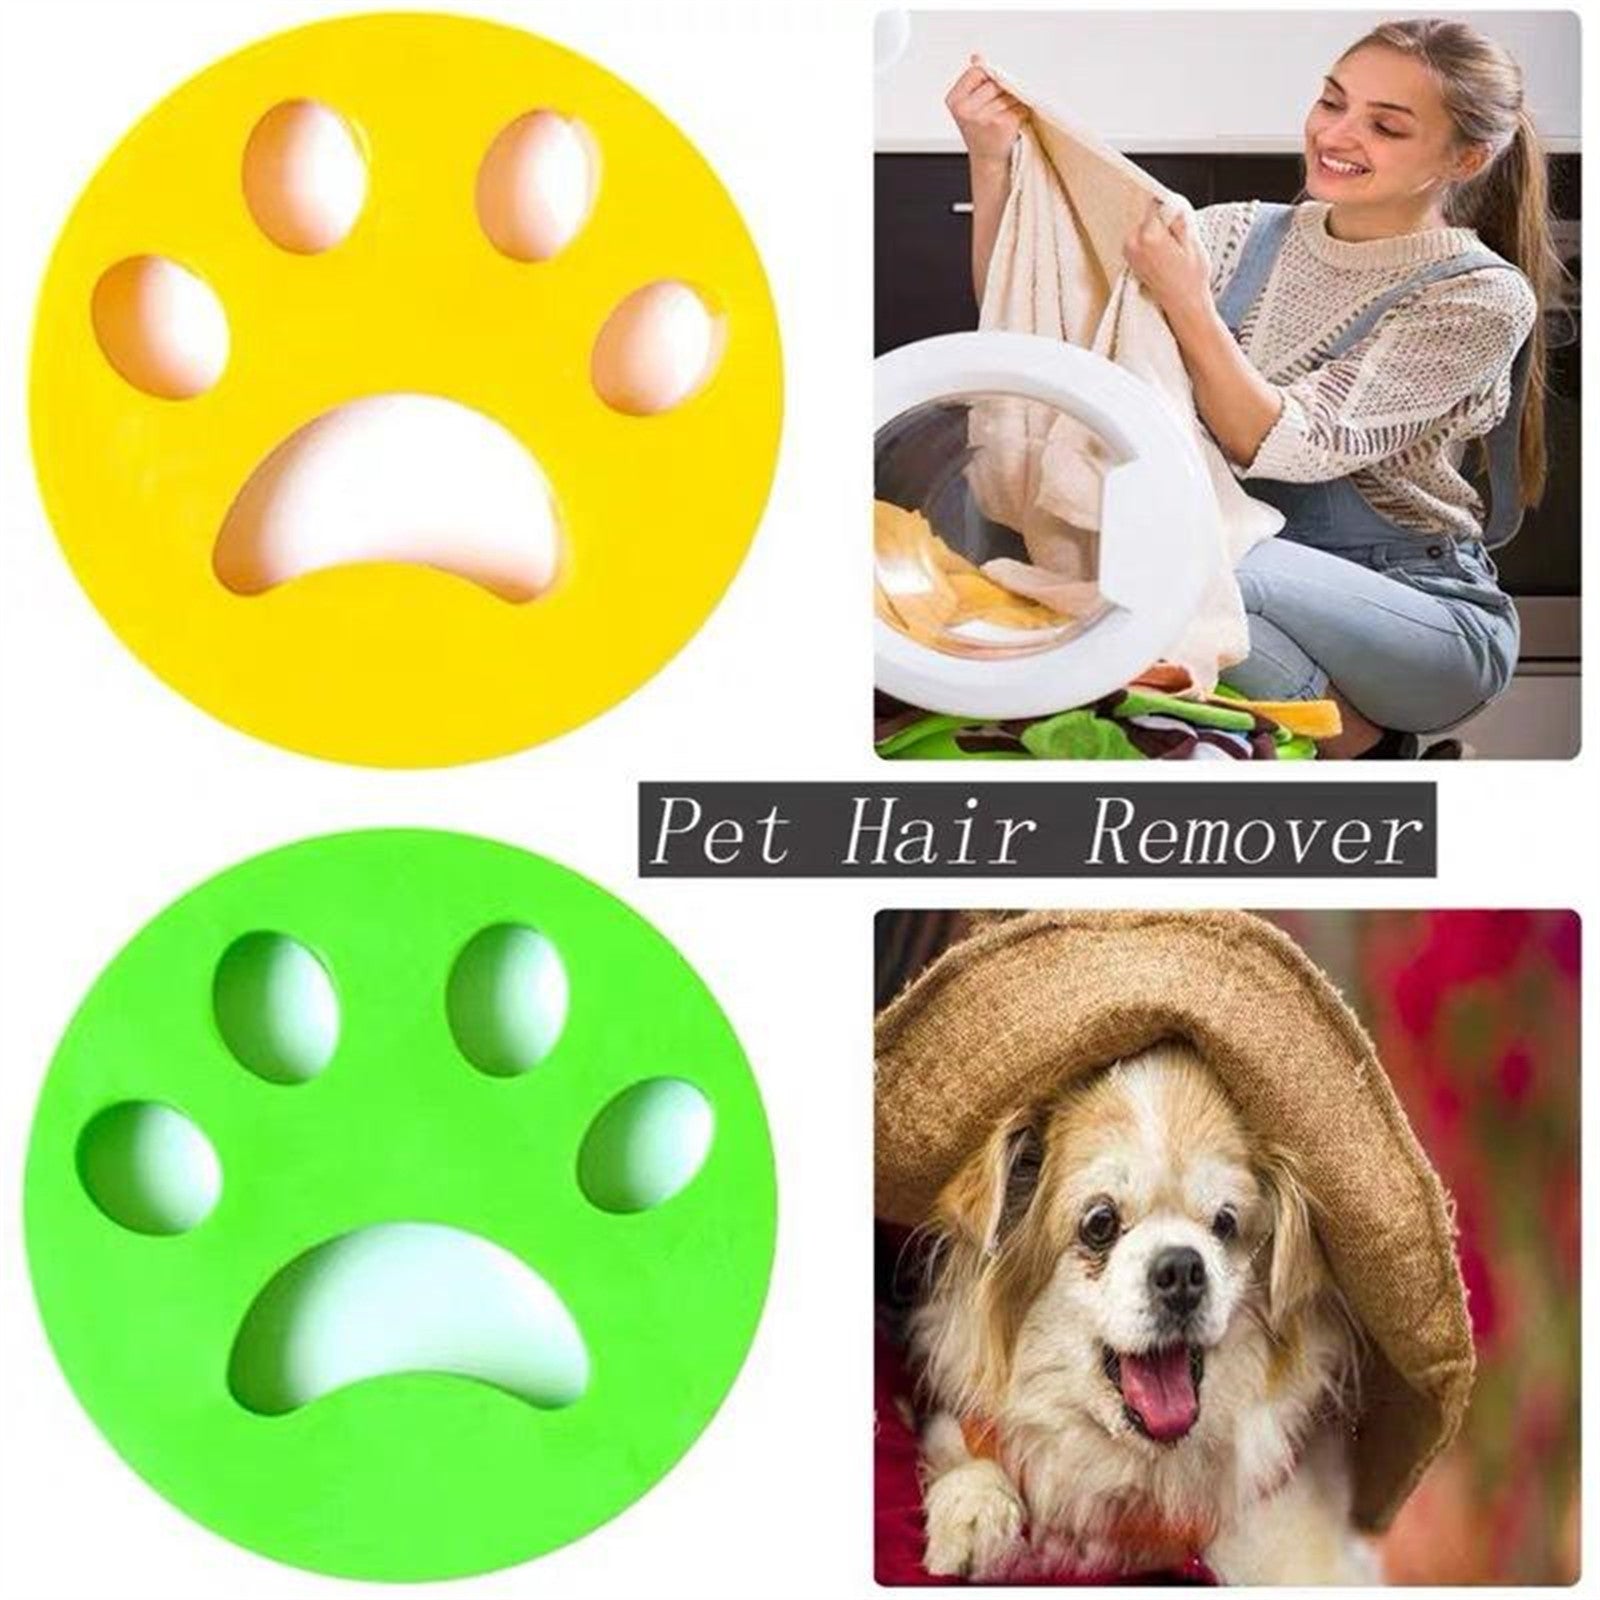 Pawfriends Soft Silicone Pet Hair Remover Clothes Cleaning Lint Catcher Solid Laundry Ball - SILBERSHELL